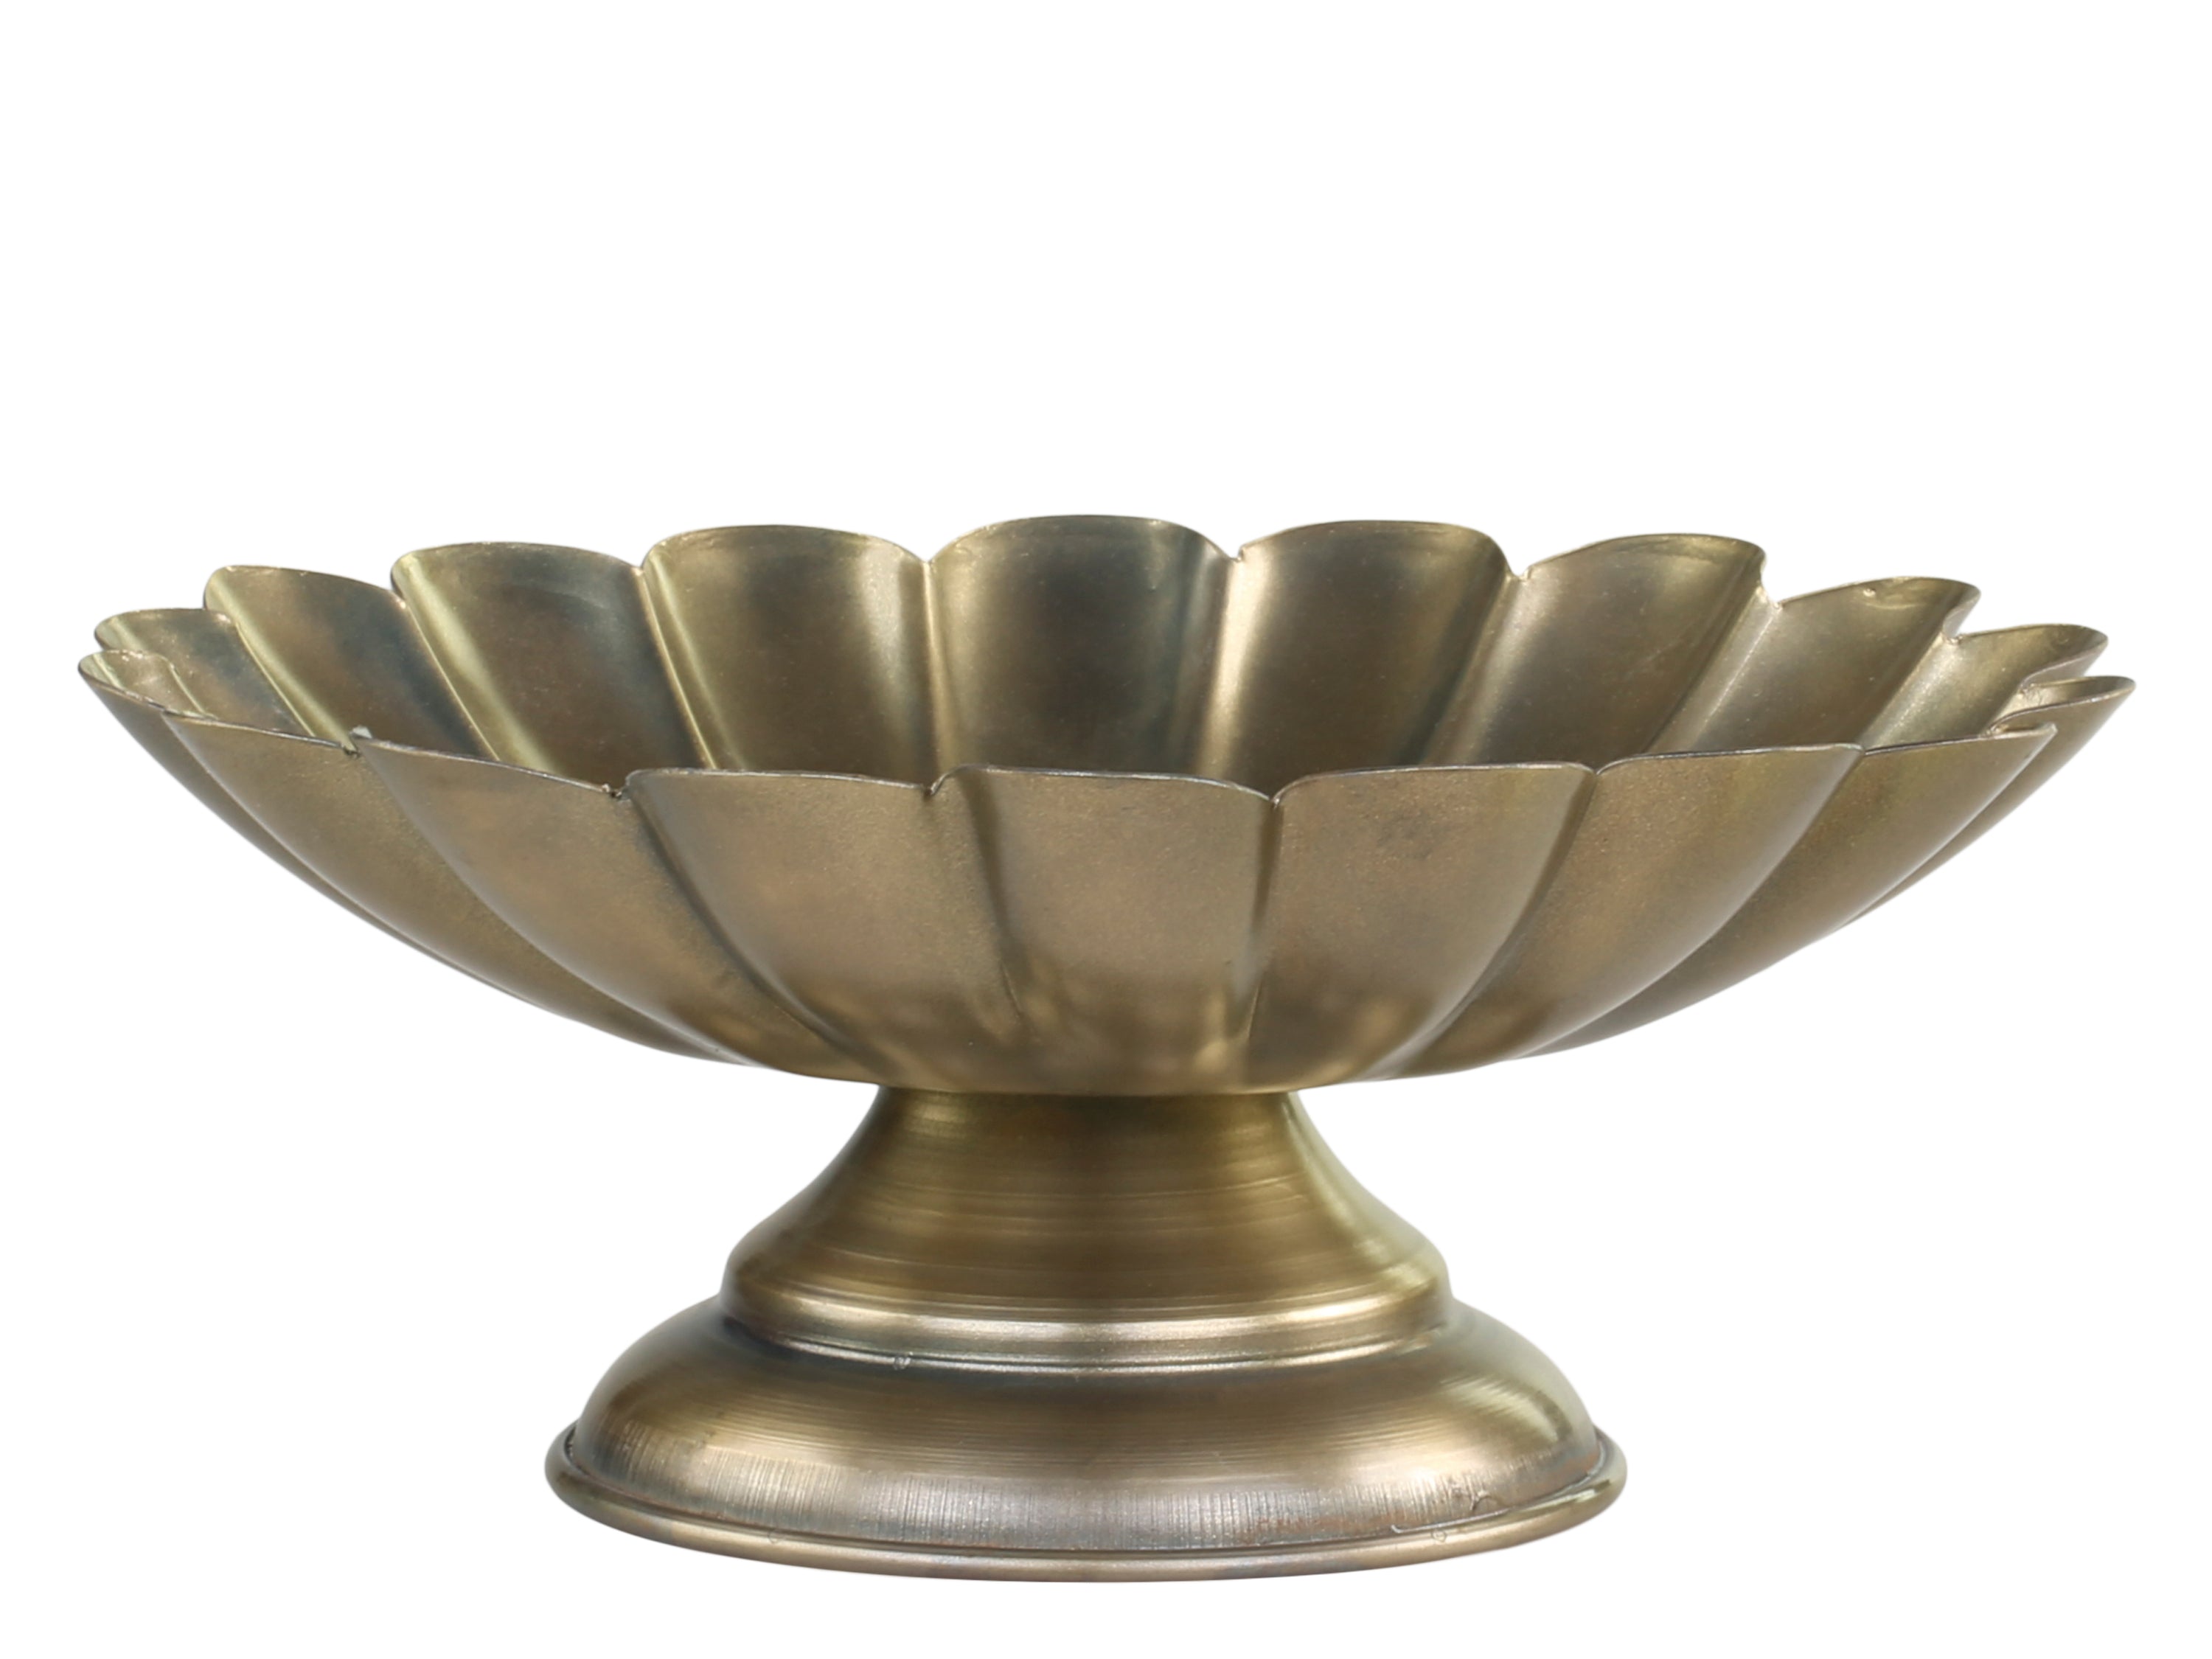 Small Centrepiece on foot with grooves